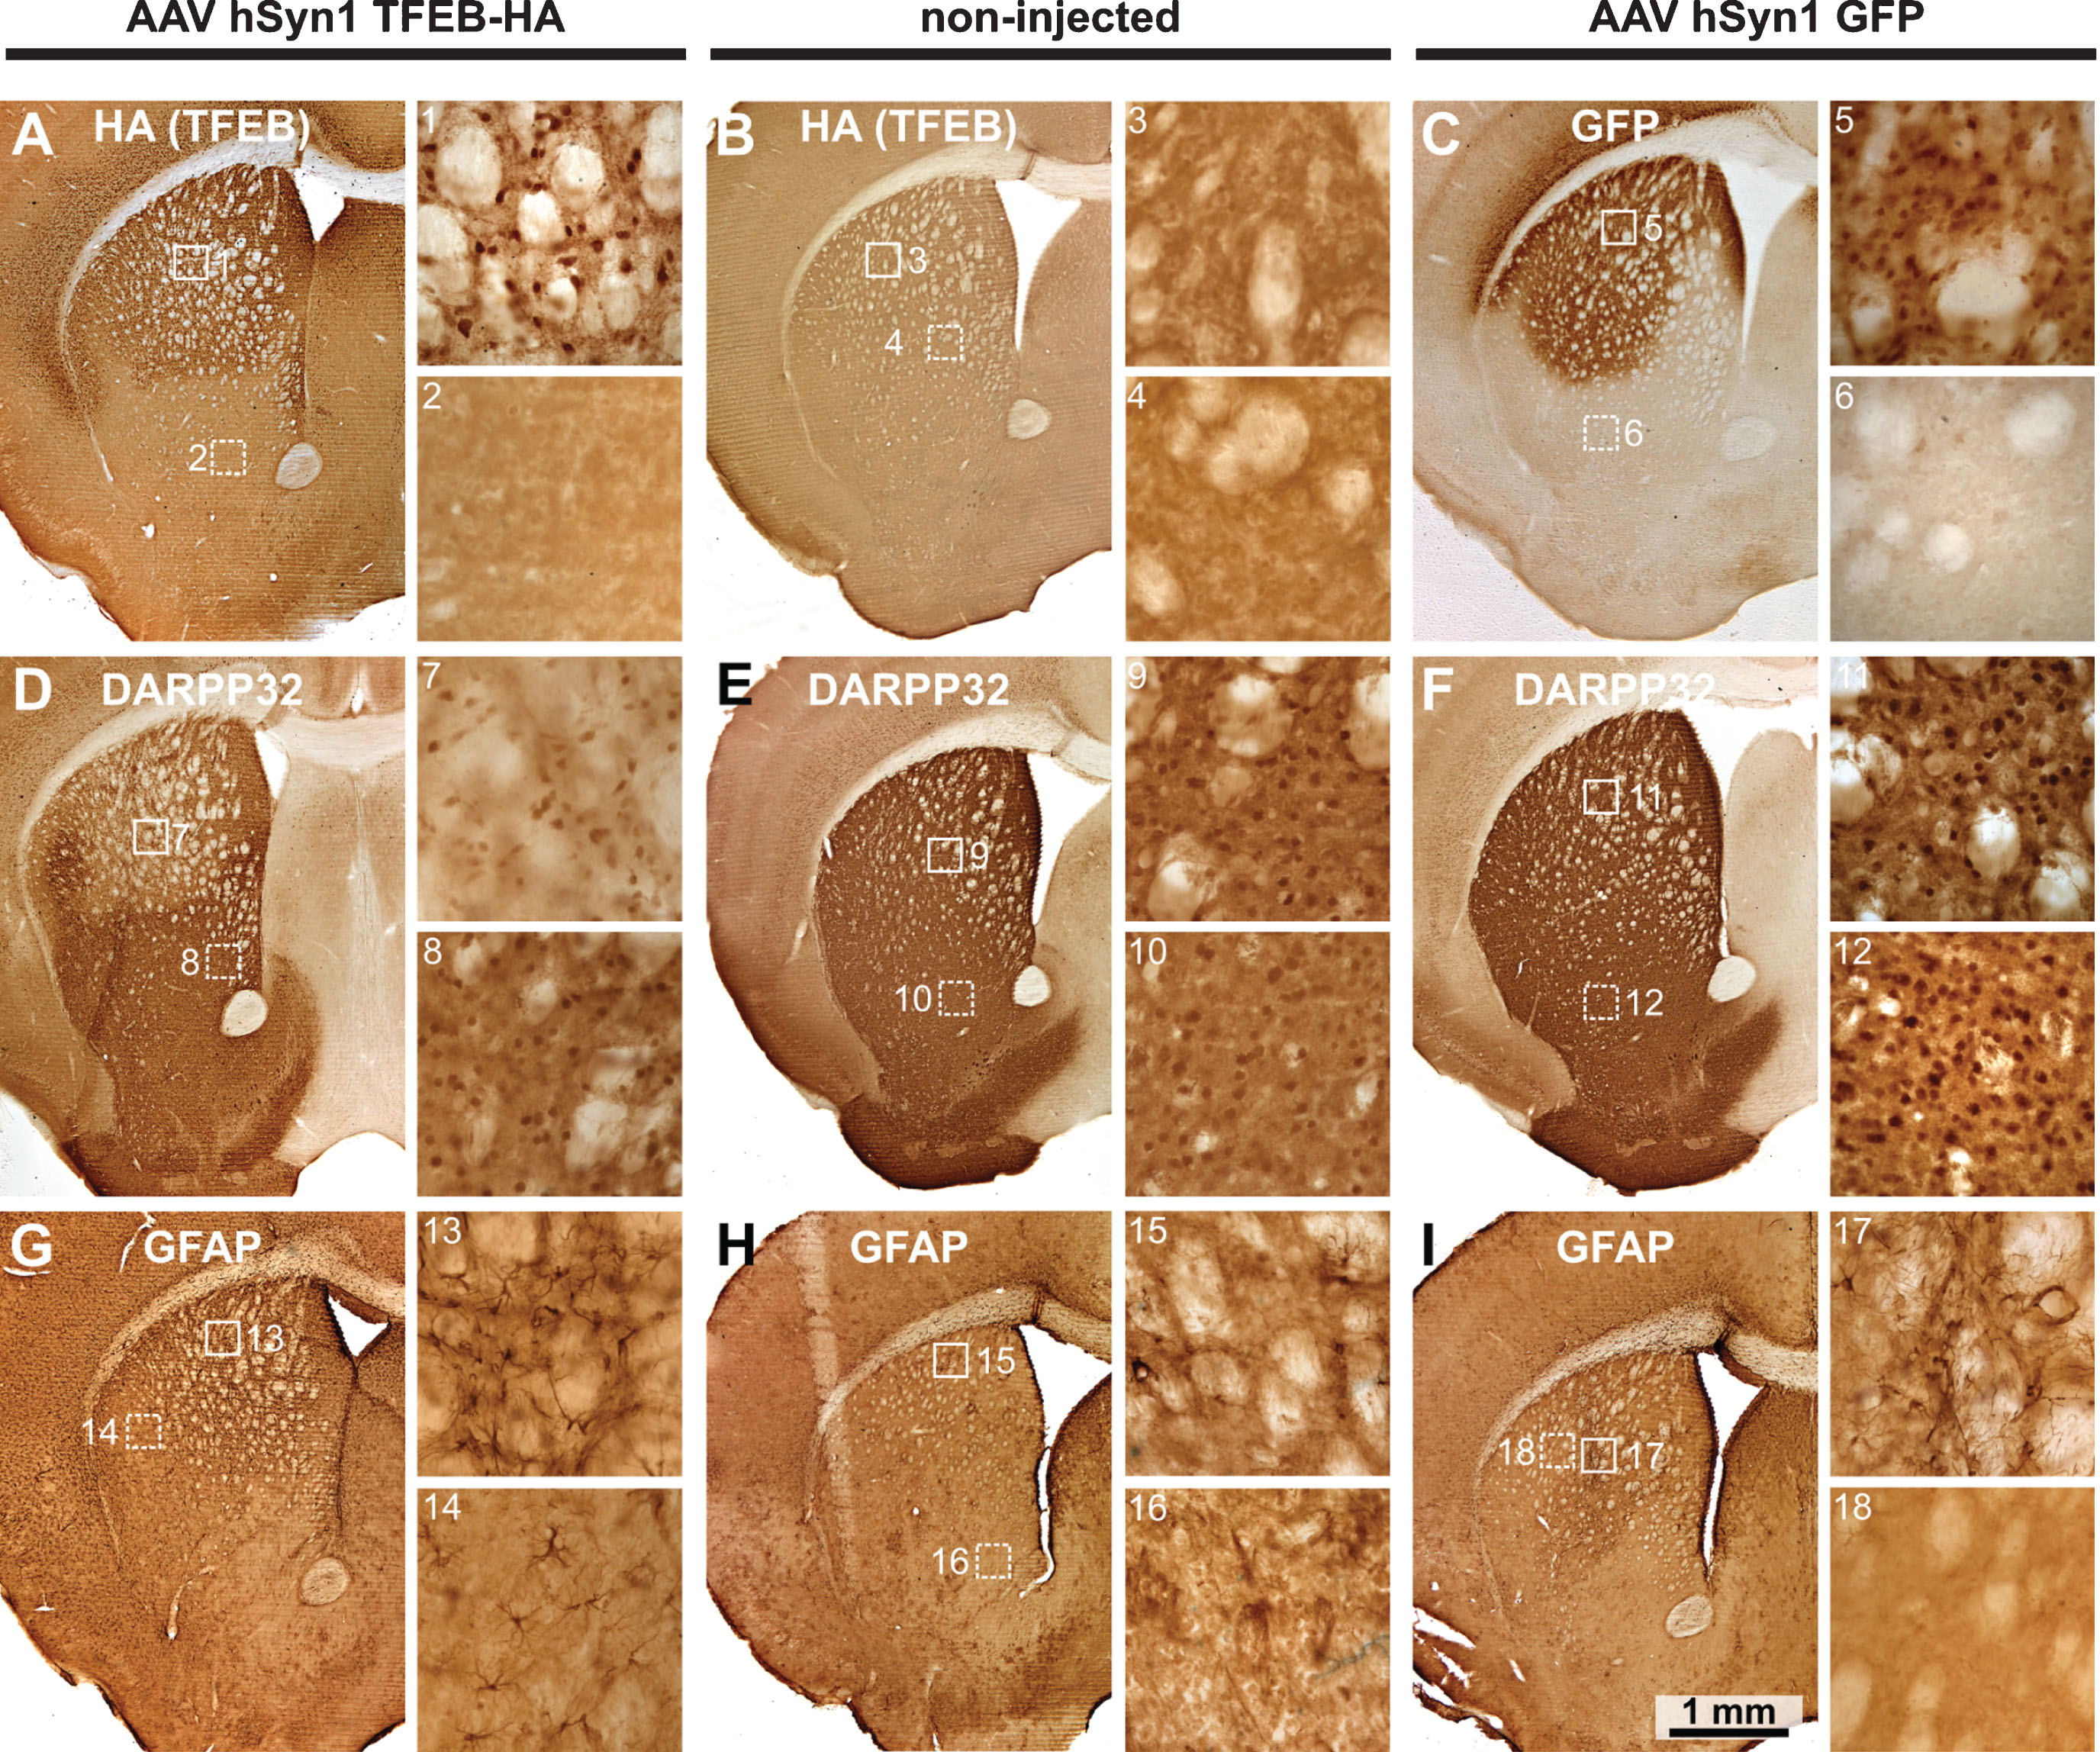 Immunohistochemistry for TFEB-HA, DARPP32 and GFAP in mice injected with AAV hSyn1 TFEB-HA, AAV hSyn1 GFP or non-injected and examined 2 months post-injection: Immunoperoxidase labeling for HA (TFEB-HA) (A, B) or GFP (C) within the injected or control striatum. Images from corresponding sections stained with DARPP32 (D, E, F) and GFAP (G, H, I) show extent of labeling within the striatum. Numbered boxes correspond to areas displayed in the enlargements to the right. DARPP32 staining of cell bodies and processes is diminished in the TFEB-HA affected area of striatum (D). Note increased GFAP labeling in the area of striatum affected by TFEB-HA injection (G). N = 2 mice per treatment group.